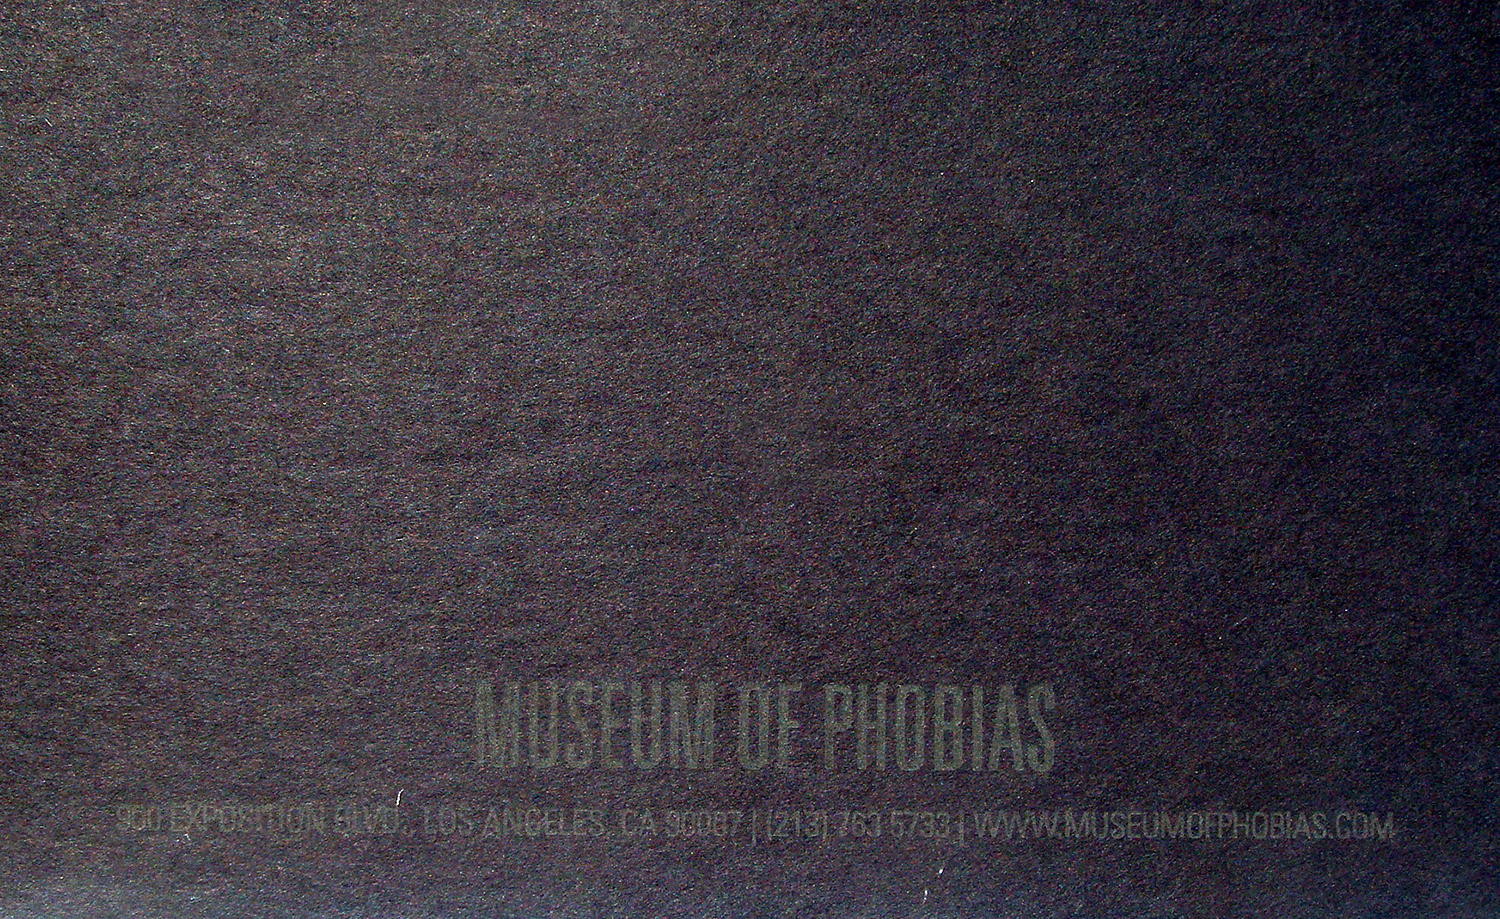 Museum of Phobias Collateral Laser-cut